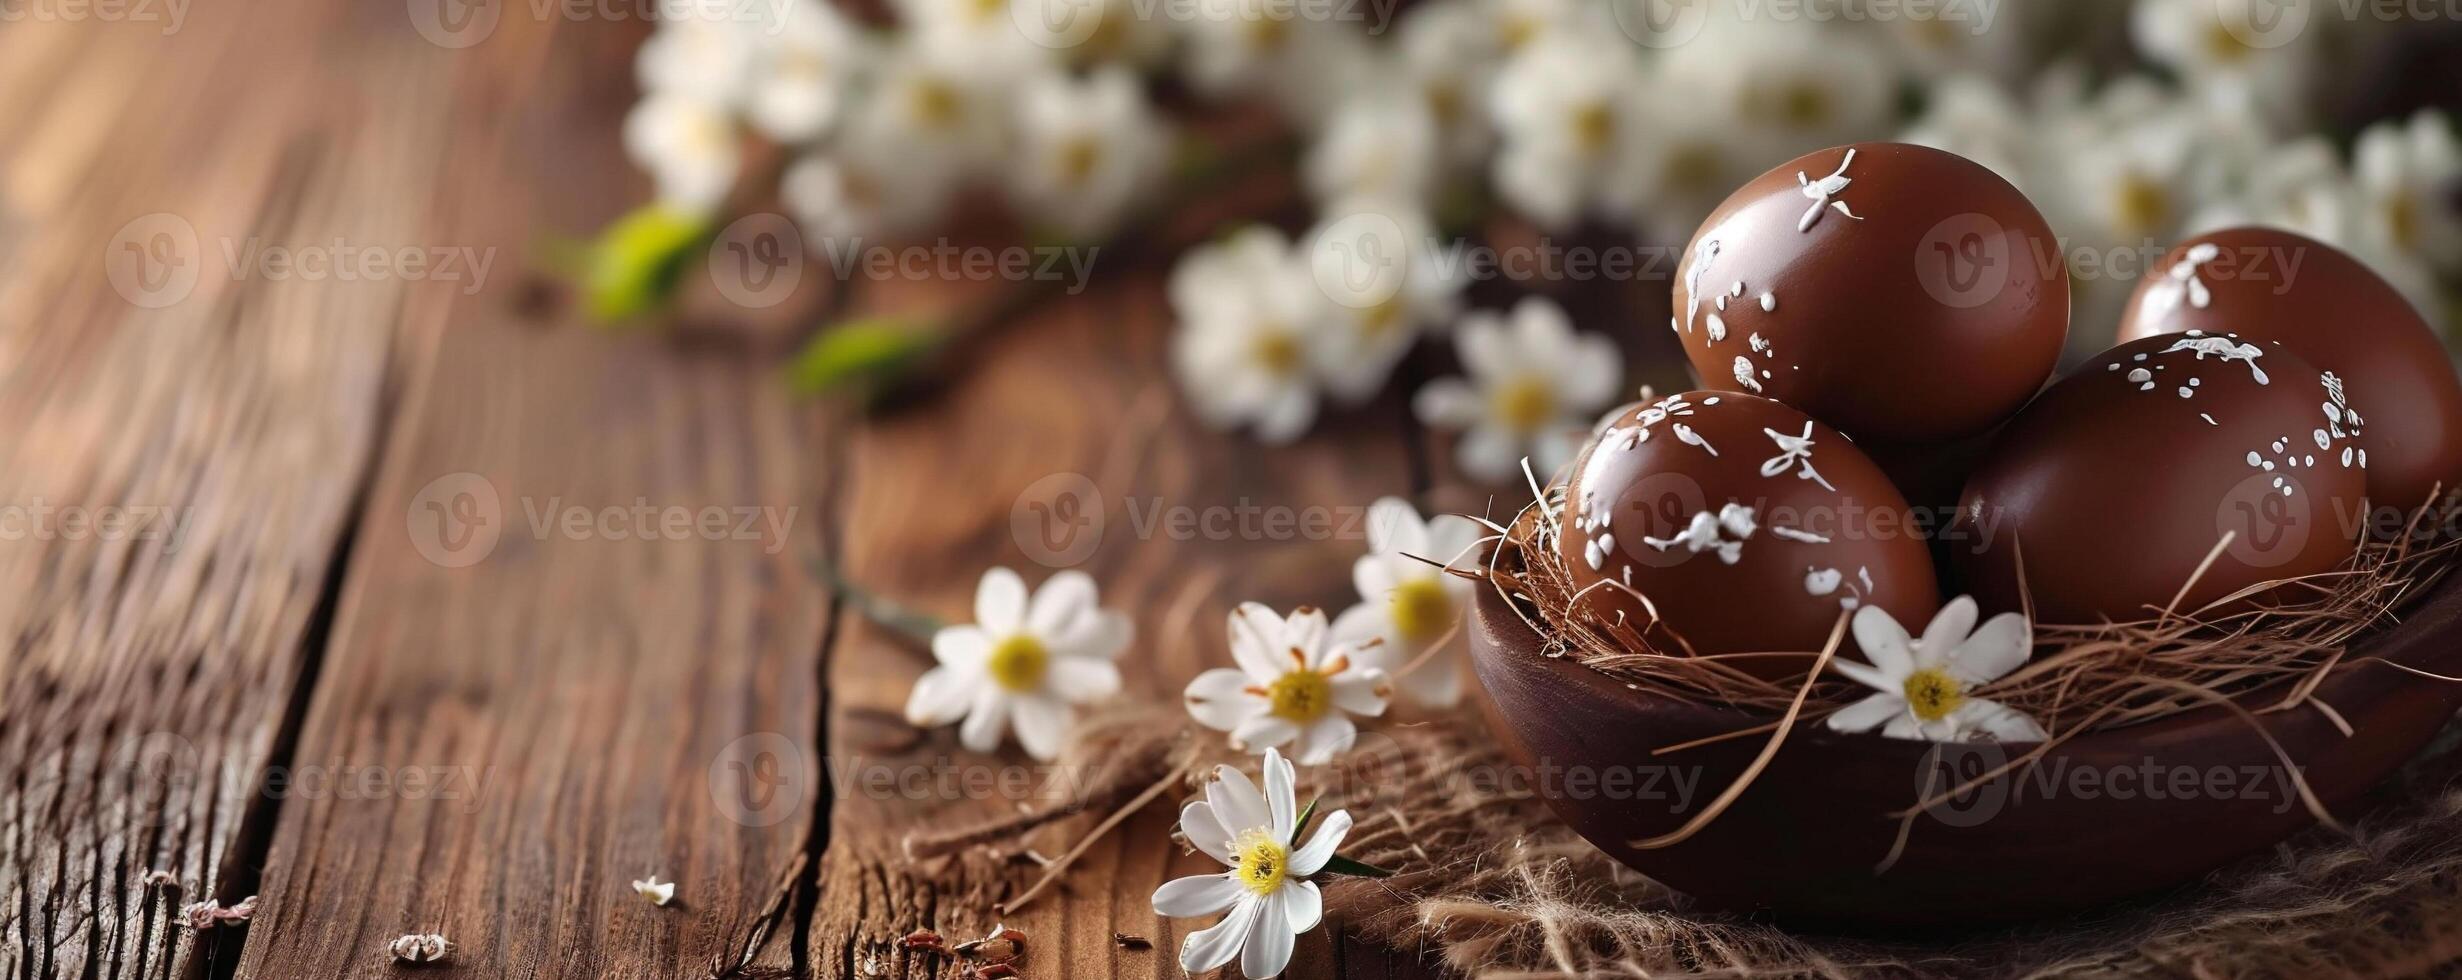 AI generated Chocolate eggs in a nest with white spring flowers on a wooden surface create a rustic and inviting Easter scene. decor advertising or traditional Easter celebration themes. photo